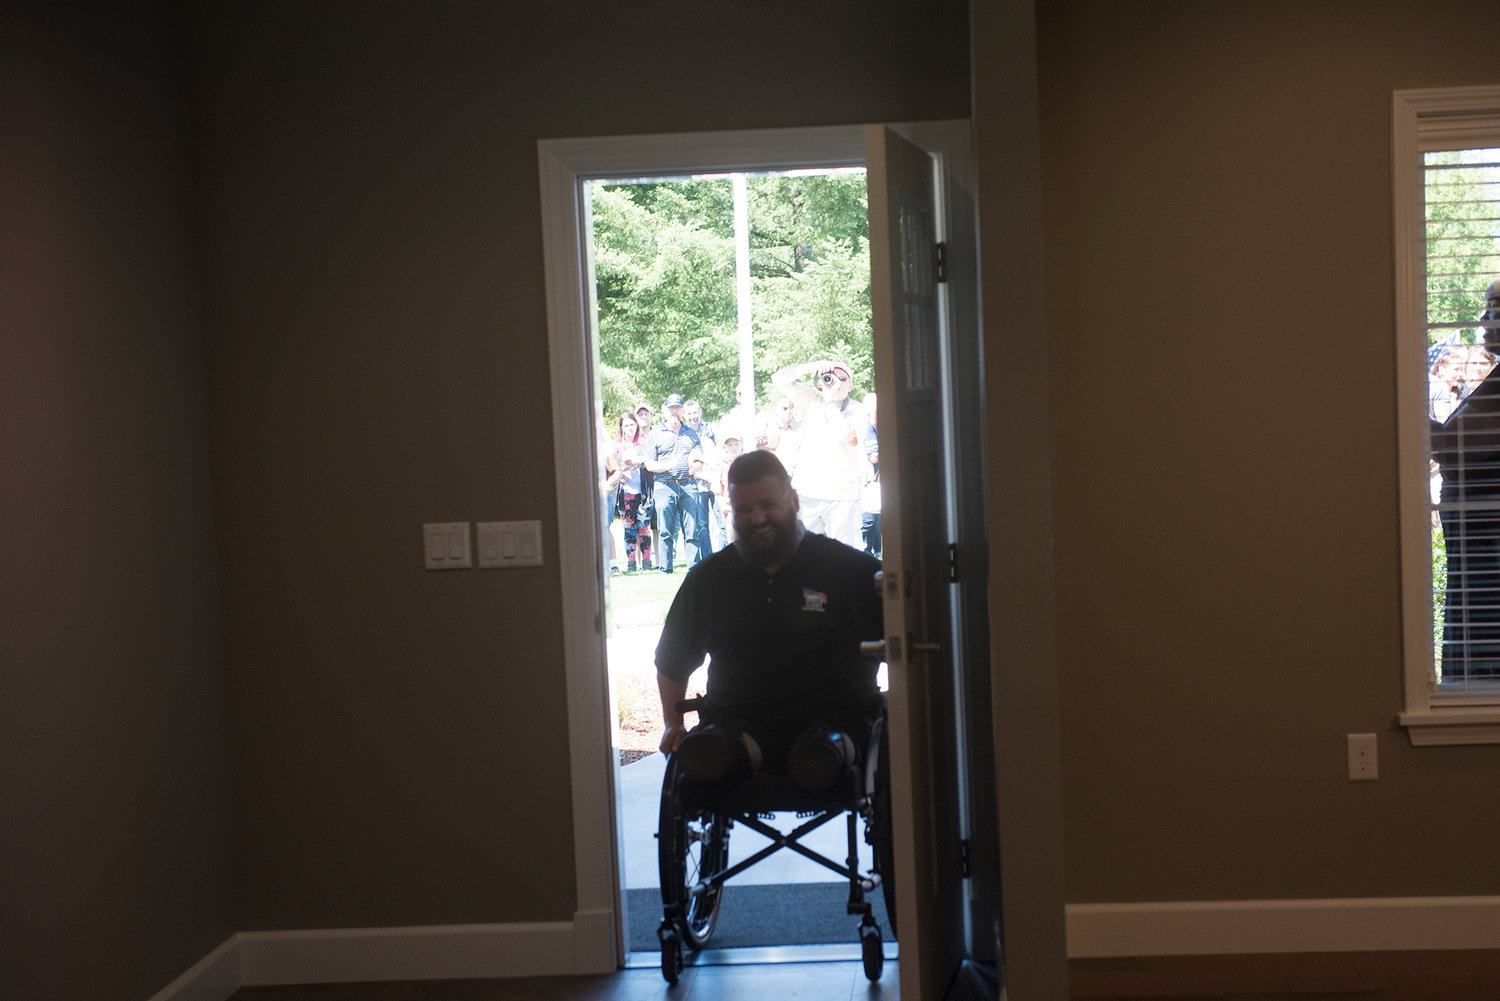 Army Sgt. Jereme Sawyer enters his new house in Tenino for the first time as its owner on Saturday, July 20, 2019.